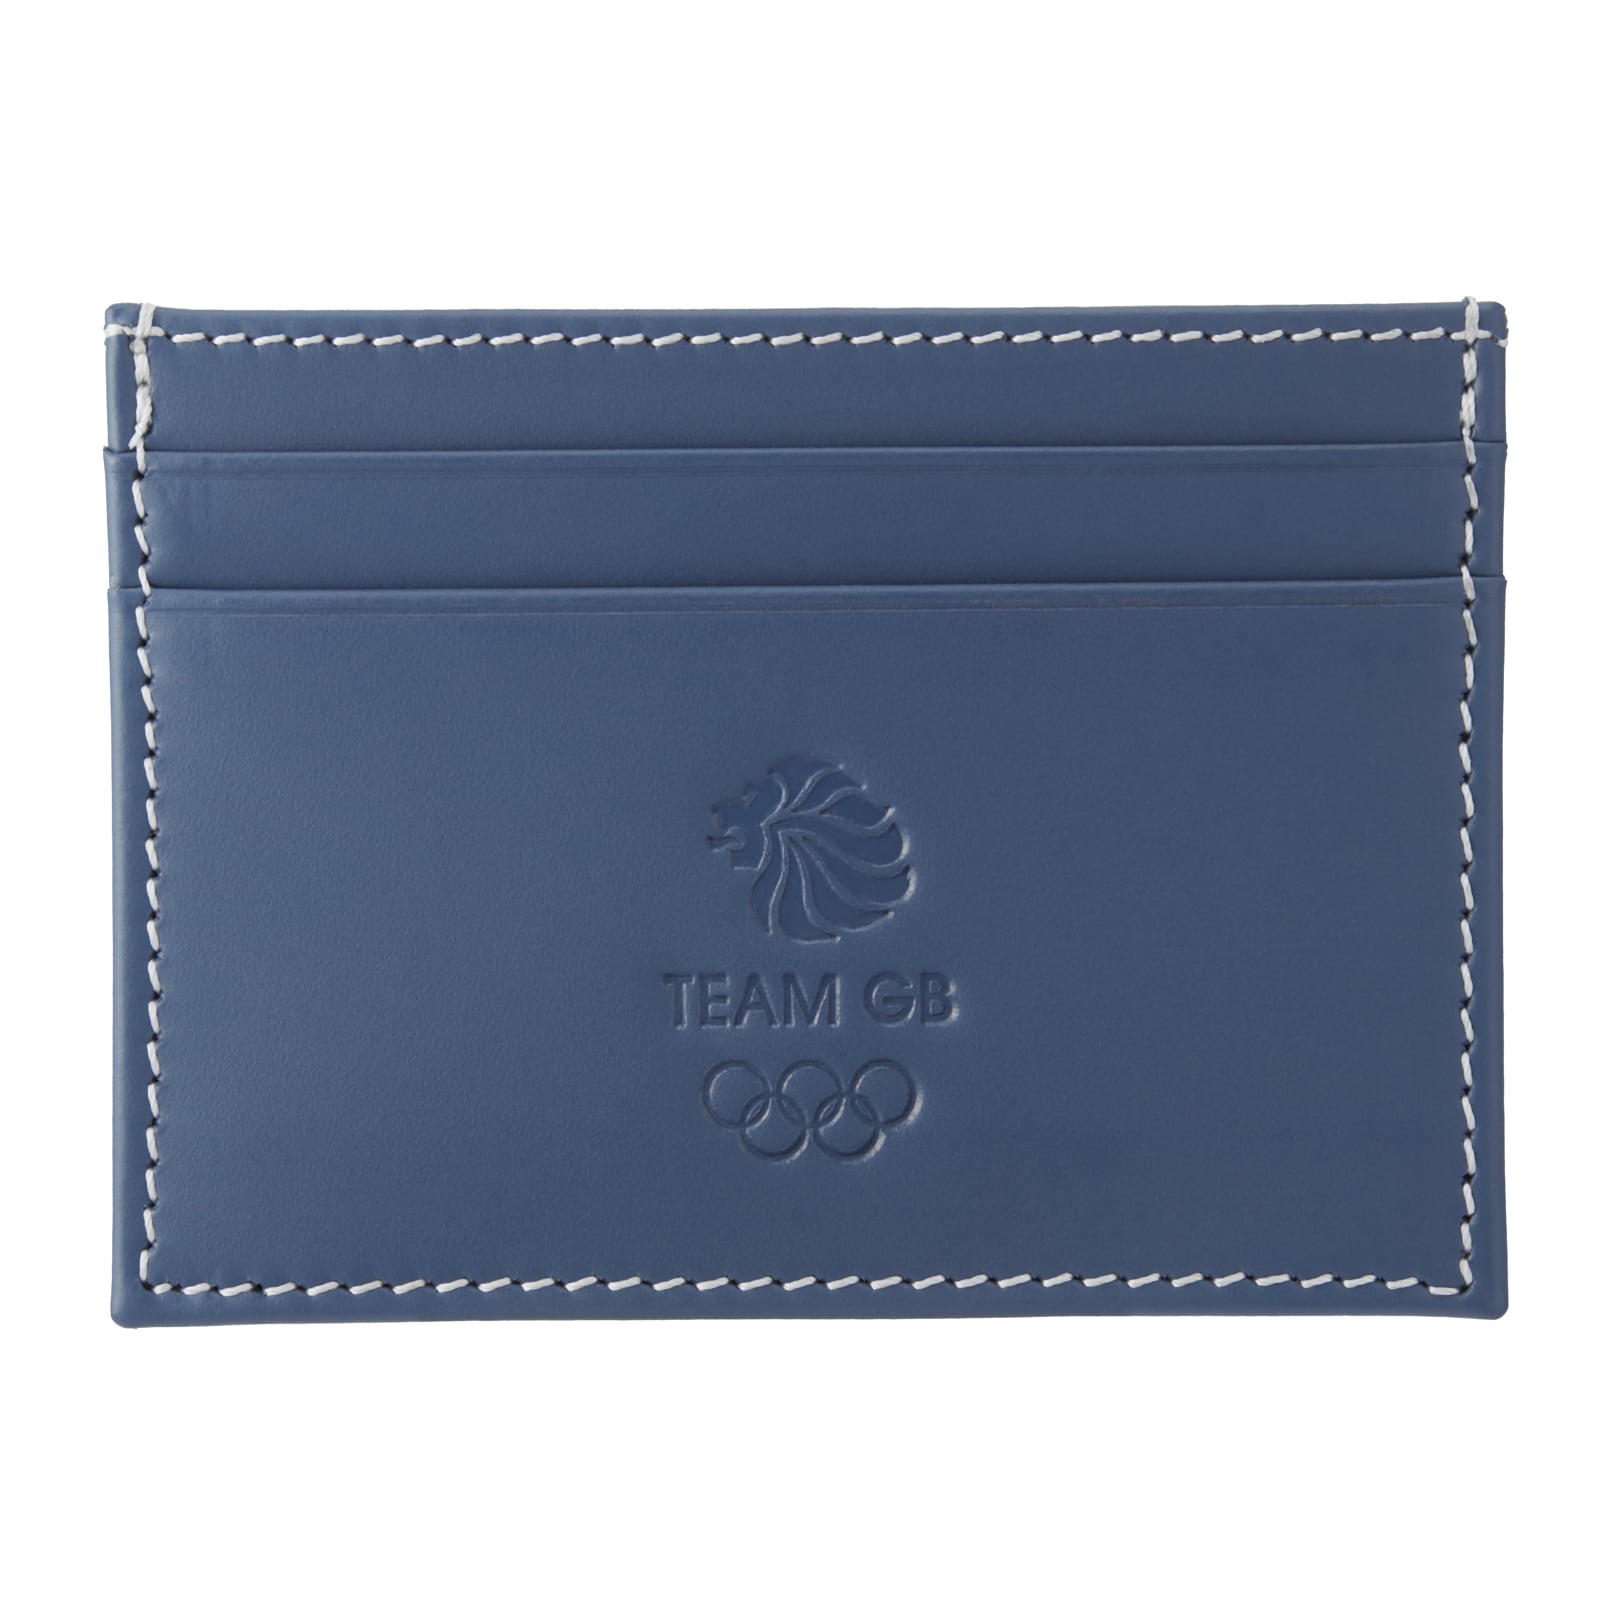 Team GB Smooth Leather 4CC Wallet - Blue